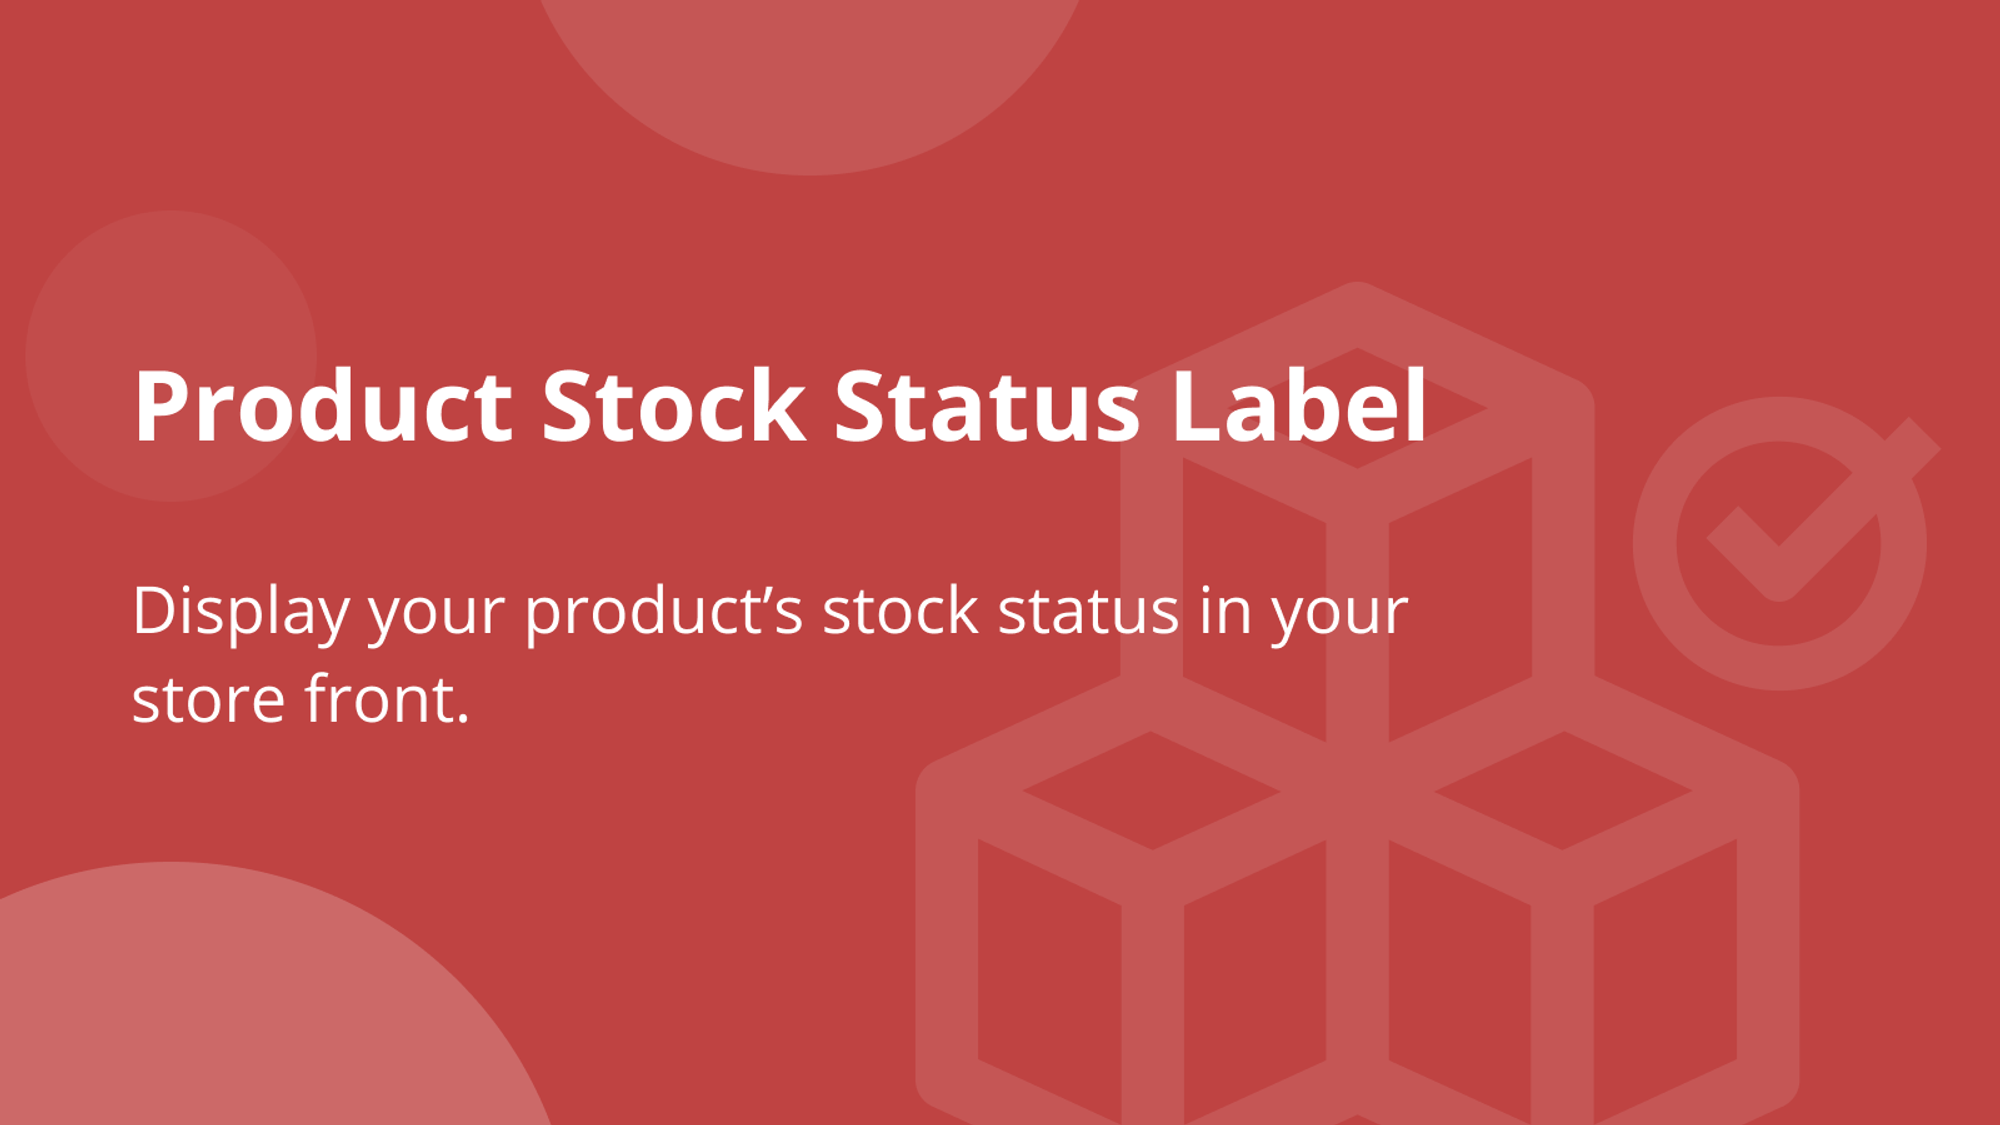 Product Stock Status Label | Shopify App Store